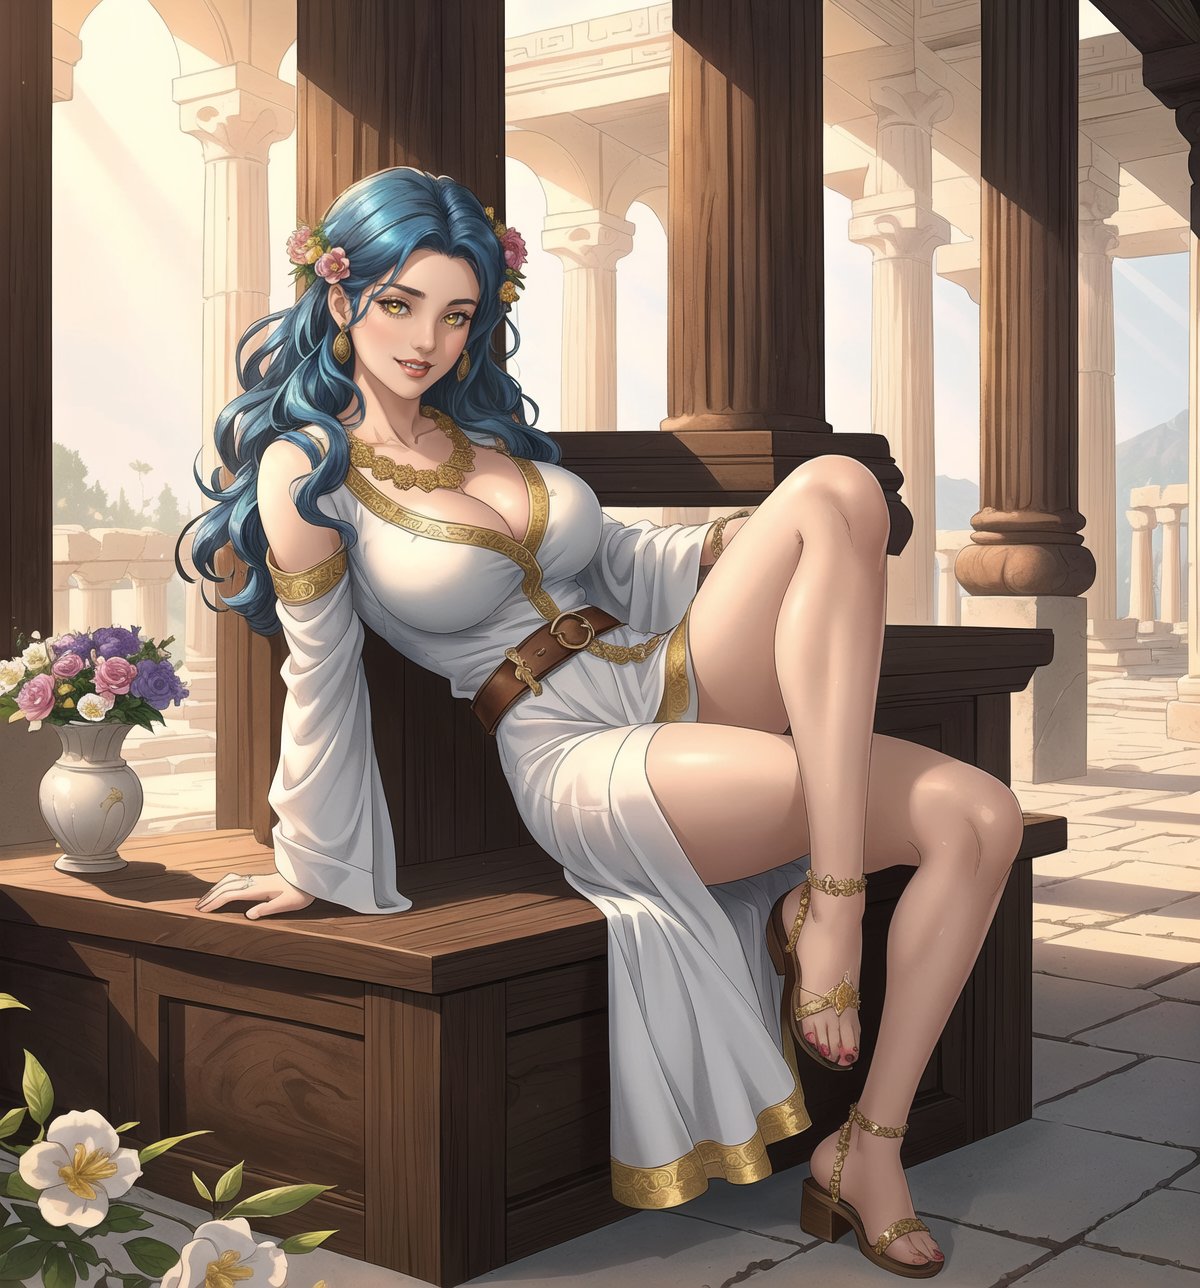 An ultra-detailed 16K masterpiece with classic and mythological styles, rendered in ultra-high resolution with stunning graphical detail. | Sofia, a 27-year-old woman, is dressed in a Greek woman's costume, consisting of a white linen tunic with gold details and a brown leather belt. She is also wearing brown leather sandals and a wreath of flowers and olive leaves in her blue hair. Her hair is long and wavy, falling gently over her shoulders. She has yellow eyes, looking at the viewer while smiling seductively, showing her teeth and wearing red lipstick. It is located in an ancient Greek temple, with structures of white marble, wood and rock. The scene is lit by sunlight, creating soft shadows on the walls. There are figurines of ancient gods scattered around the place, creating a welcoming and mystical atmosphere. | The image highlights Sofia's sensual figure and the architectural elements of the ancient Greek temple. The white marble, wood and rock structures, together with Sofia, the figurines and the flowers, create a mystical and seductive environment. Sunlight illuminates the scene, creating soft shadows and highlighting the details of the scene. | Soft, warm lighting effects create a sensual and mystical atmosphere, while detailed textures on Sofia's structures and clothing add realism to the image. | A sensual and mystical scene of a Greek woman in an ancient temple, fusing elements of classical and mythological art. | (((The image reveals a full-body shot as Sofia assumes a sensual pose, engagingly leaning against a structure within the scene in an exciting manner. She takes on a sensual pose as she interacts, boldly leaning on a structure, leaning back and rubbing against the structure, reclining in an exciting way.))). | ((((full-body shot)))), ((perfect pose)), ((perfect fingers, better hands, perfect hands)), ((perfect legs, perfect feet)), ((huge breasts)), ((perfect design)), ((perfect composition)), ((very detailed scene, very detailed background, perfect layout, correct imperfections)), More Detail, Enhance